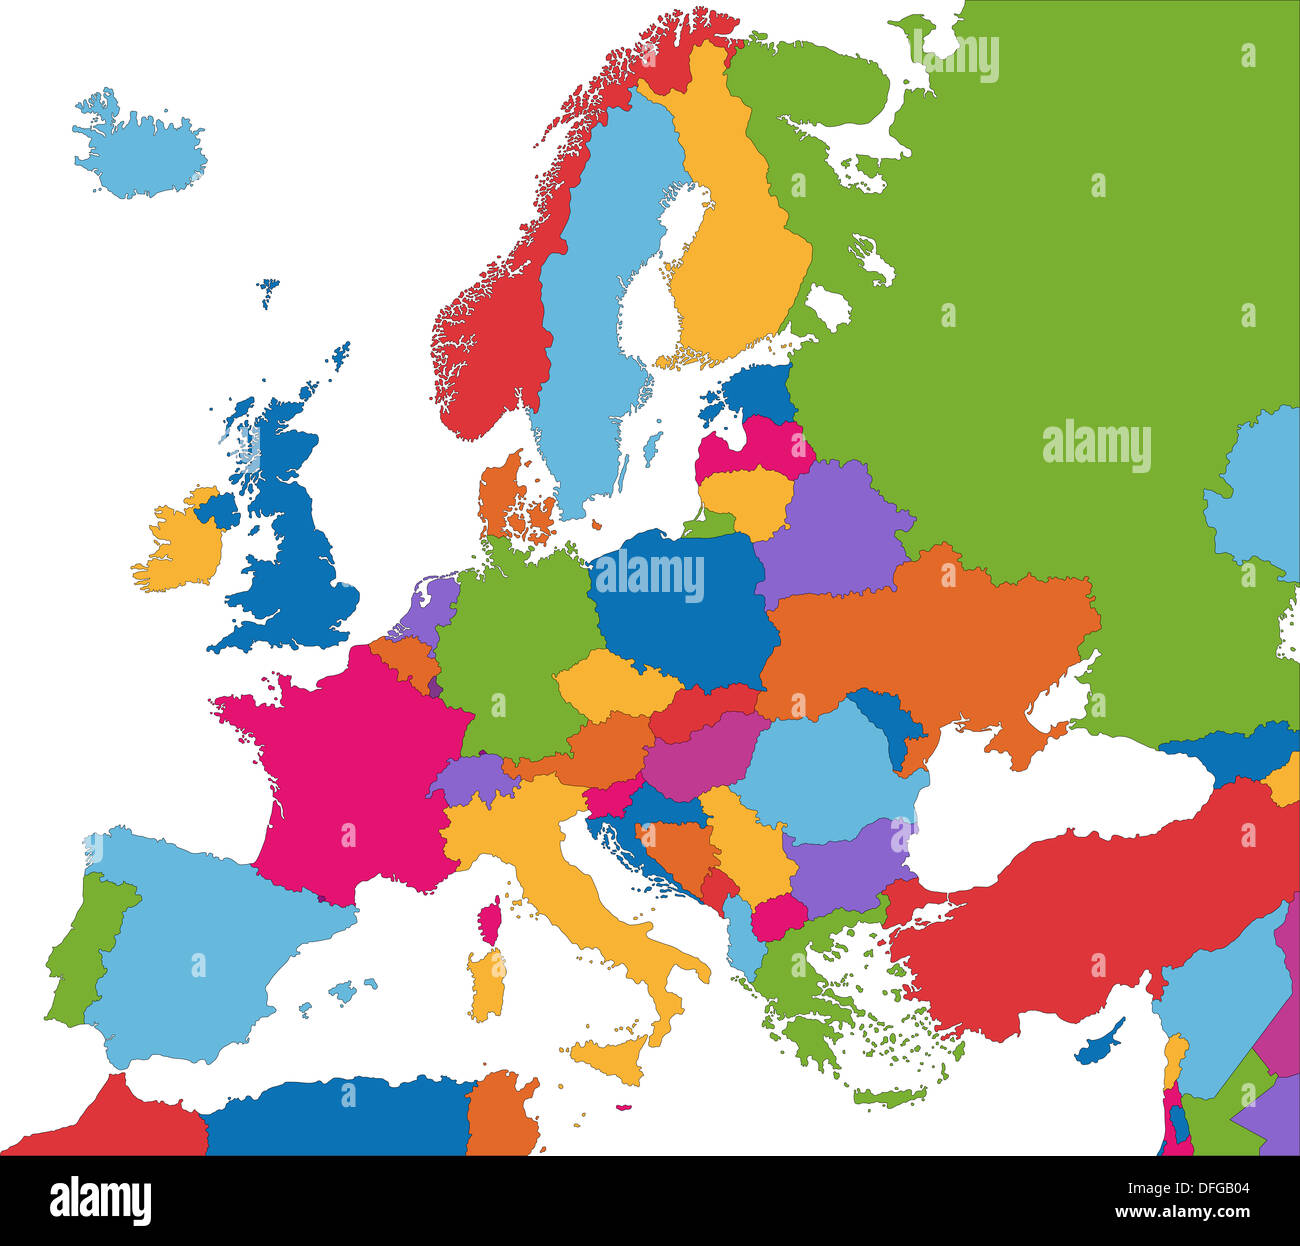 Colorful Europe map Stock Photo